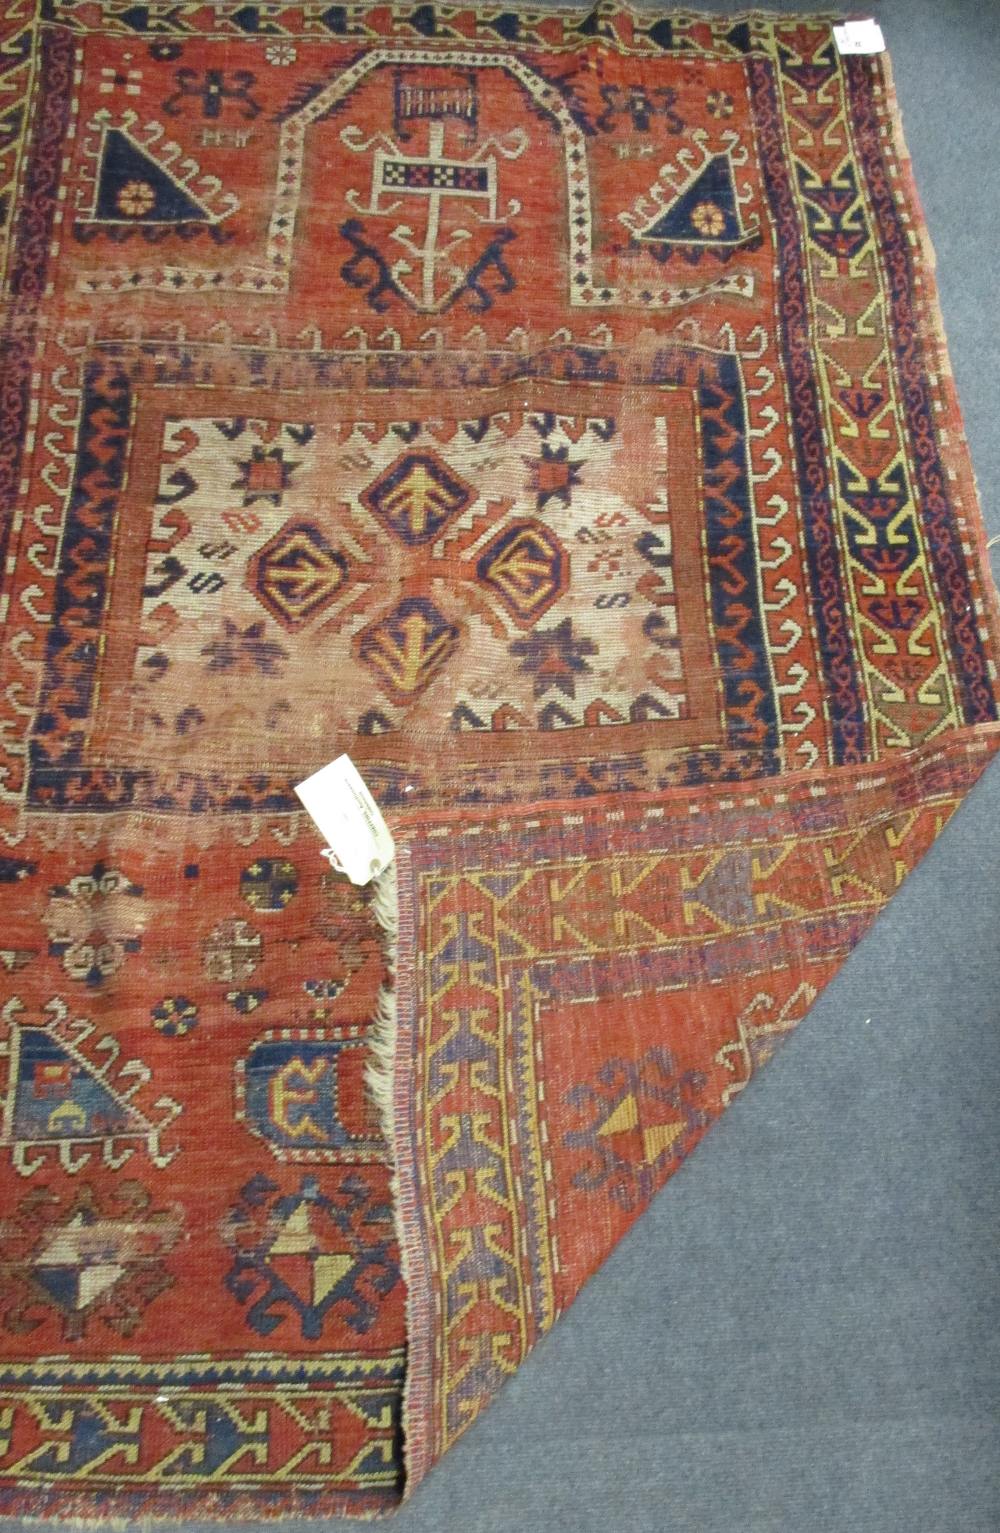 Two Afshar rugs, 125 x 169cm and 125 x 174cm - Image 4 of 4